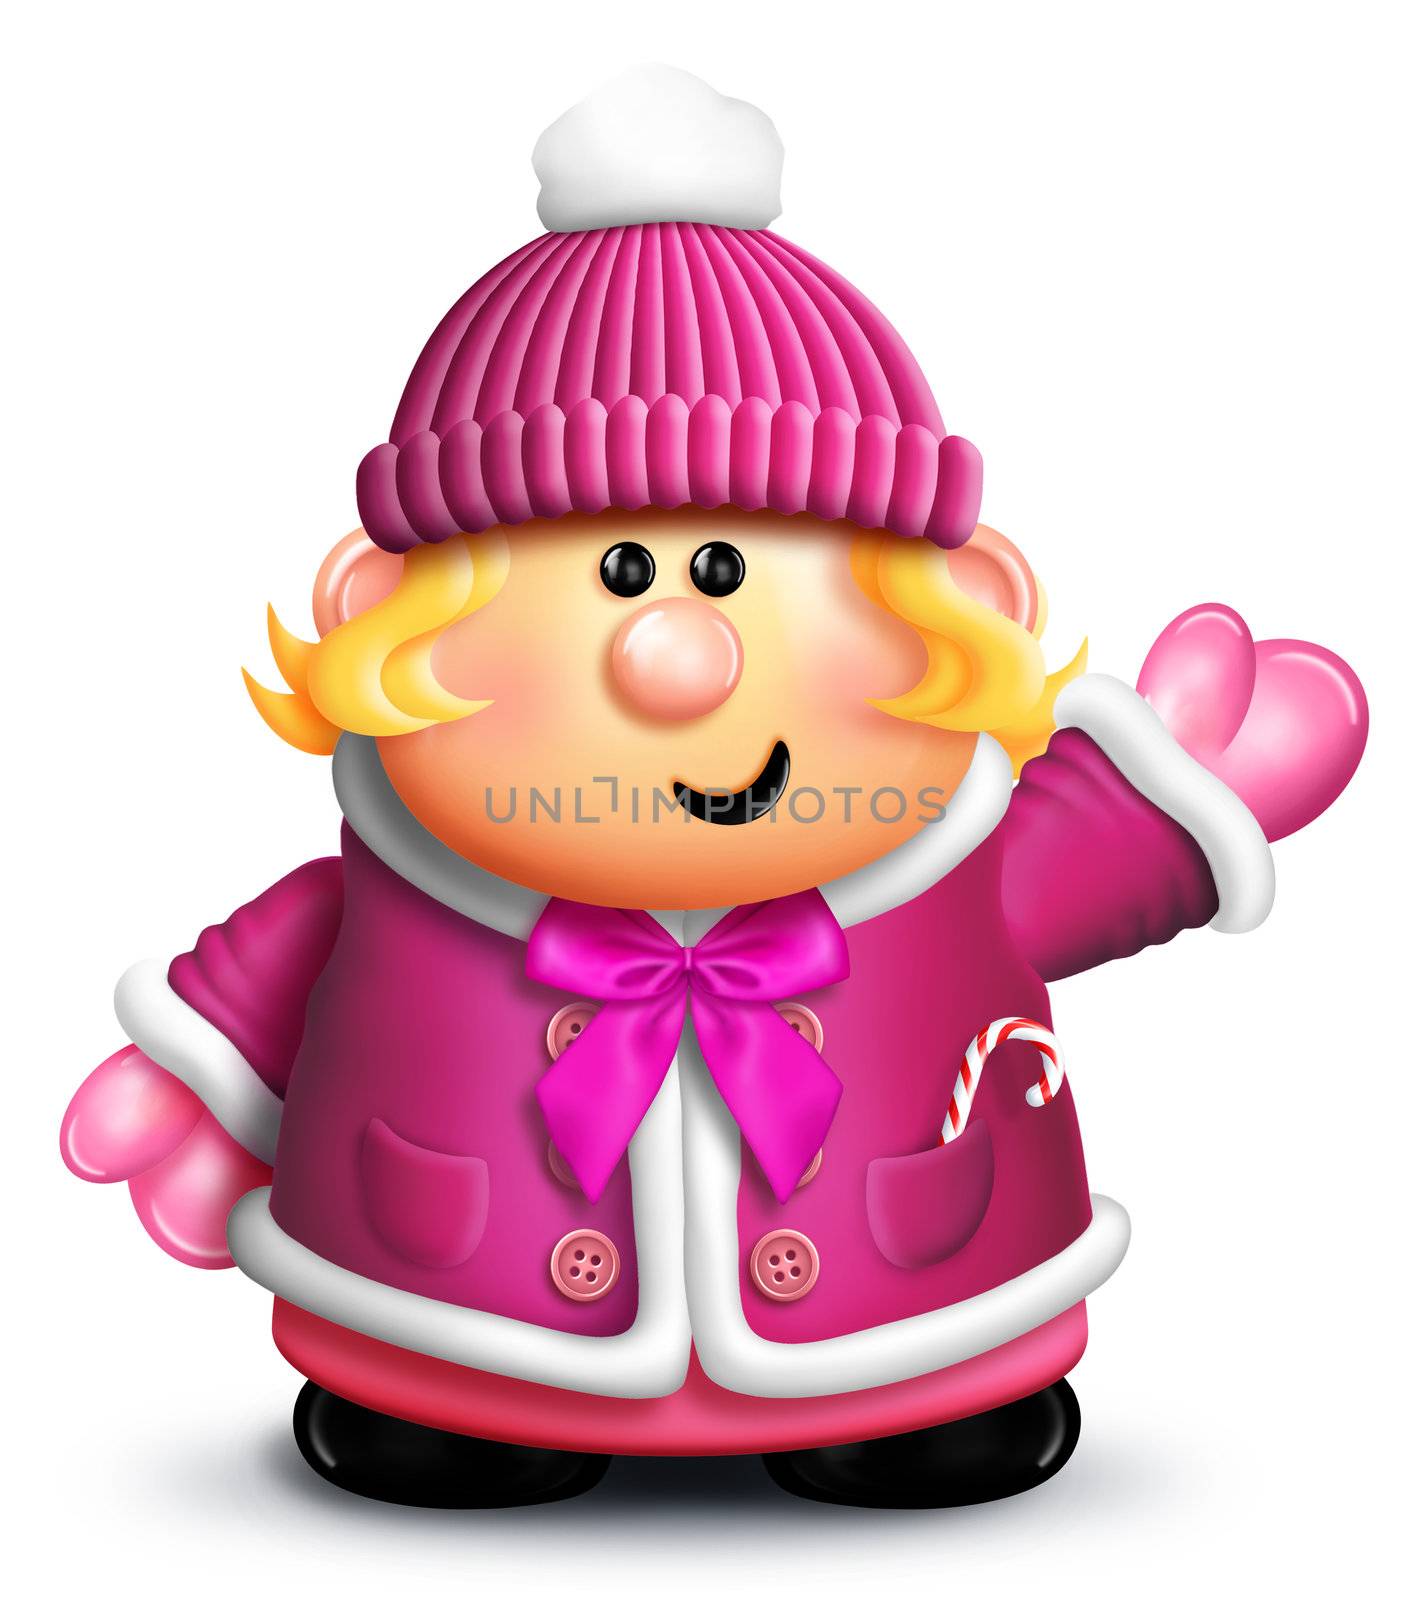 Whimsical Cartoon Girl in Winter Clothing